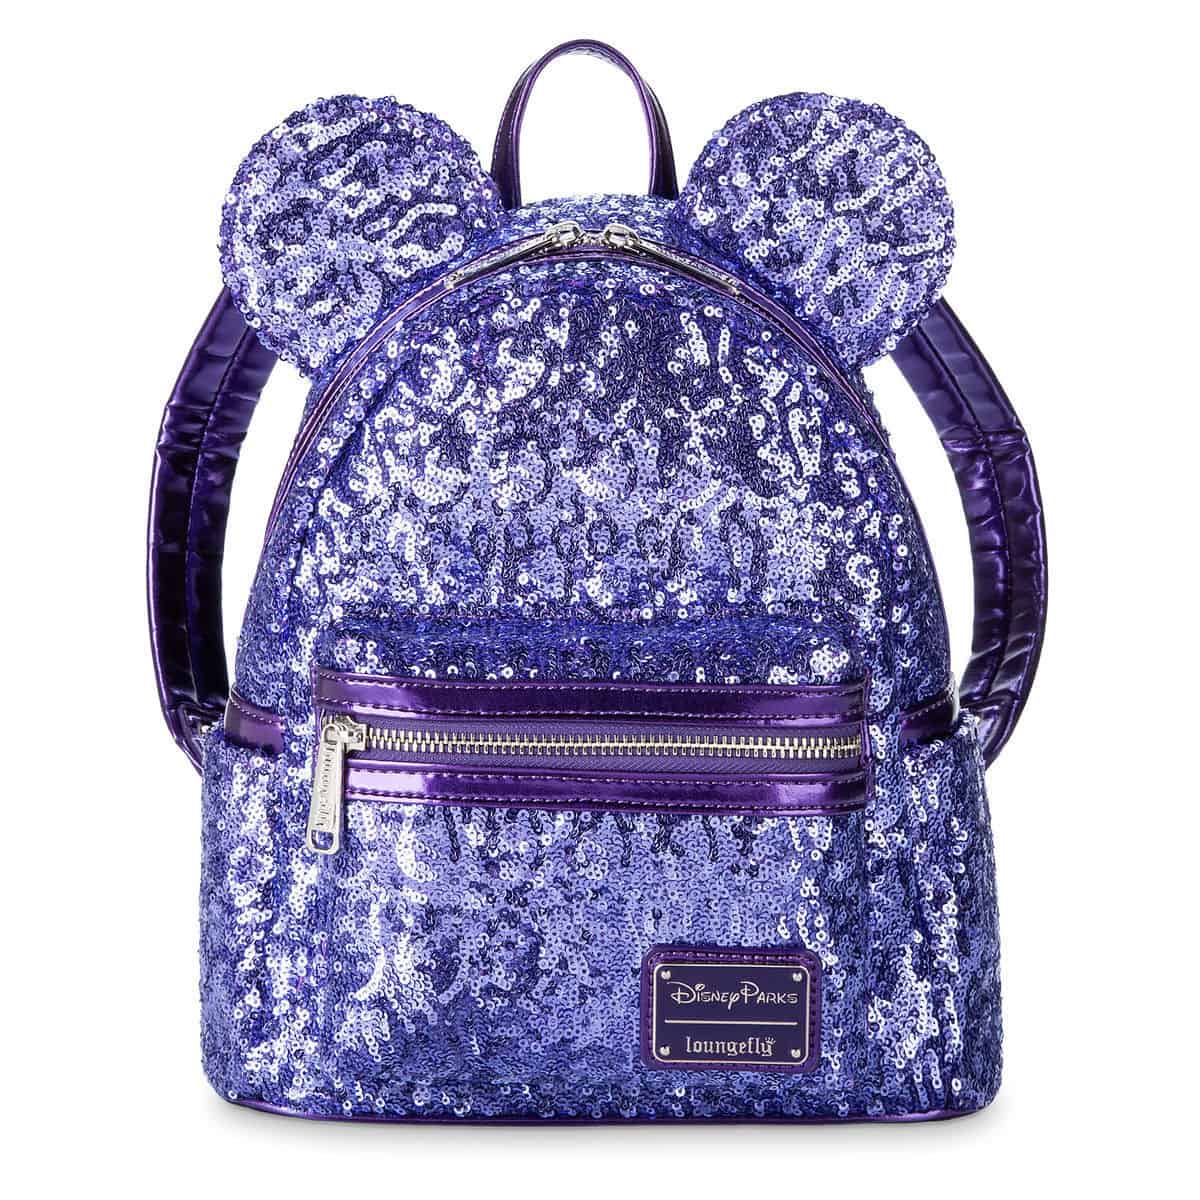 Minnie Mouse Potion Purple Sequined Mini Backpack by Loungefly - $90.00